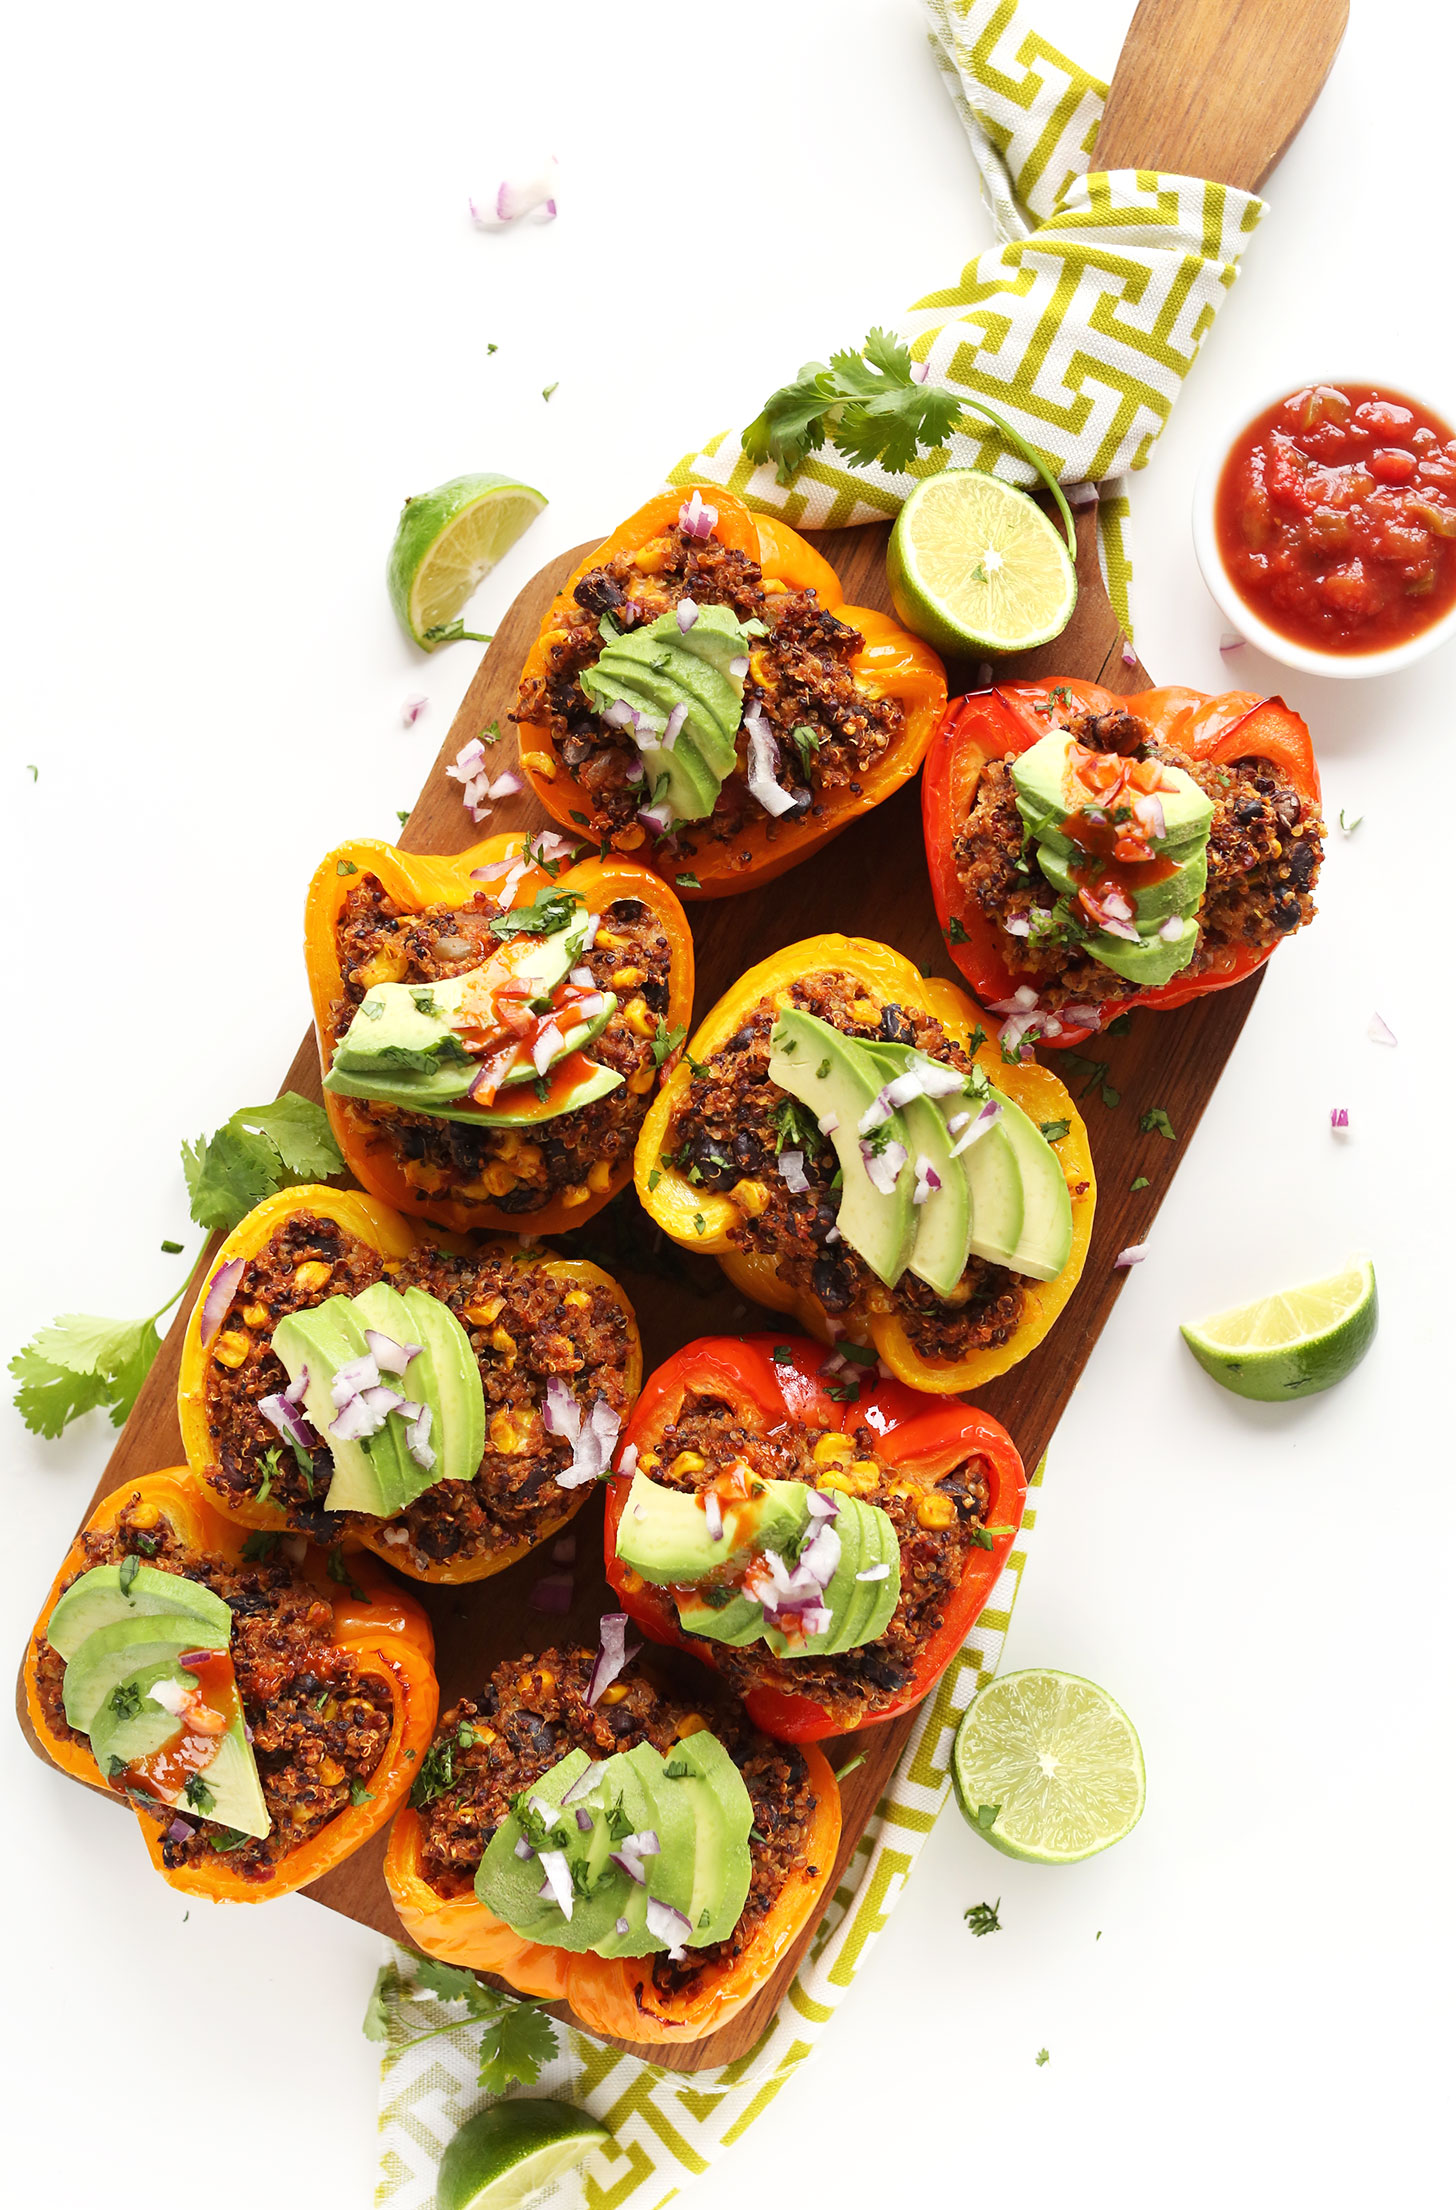 HEALTHY-Spanish-Quinoa-Stuffed-Peppers-10-ingredients-packed-with-protein-and-fiber-and-SO-flavorful-vegan-glutenfree-recipe-healthy-dinner-minimalistbaker